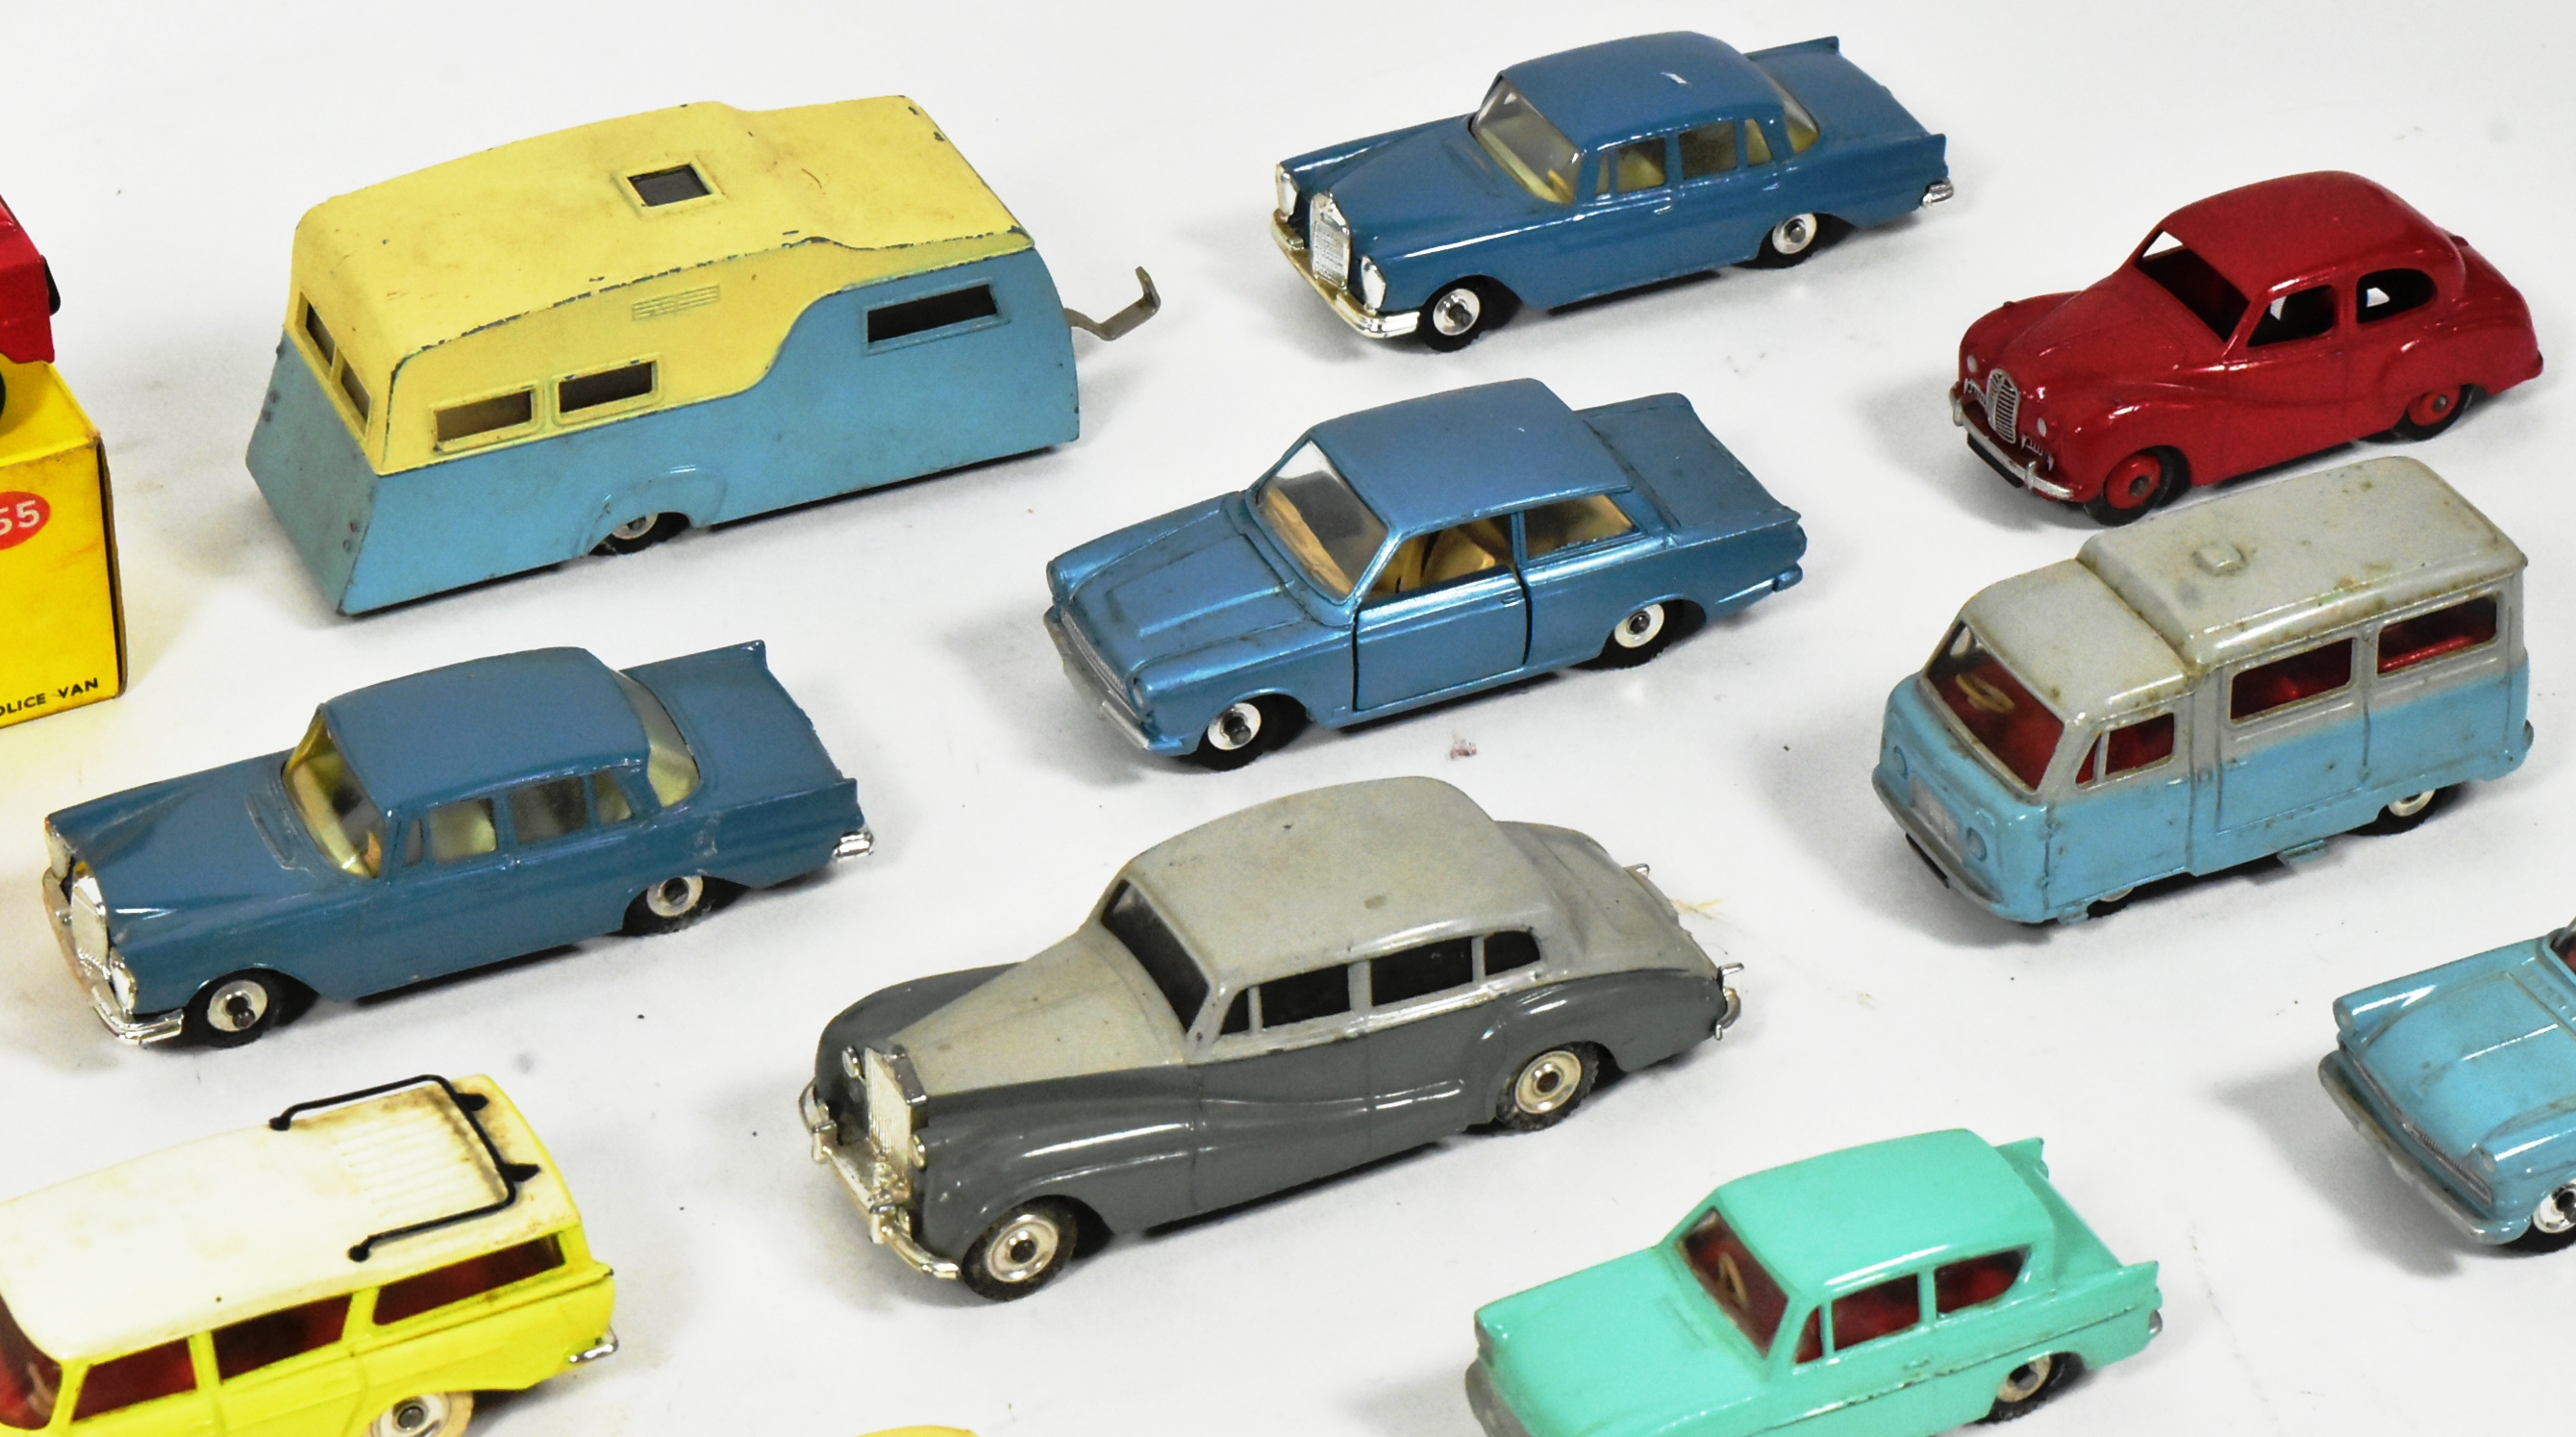 DIECAST - COLLECTION OF VINTAGE DINKY TOYS DIECAST MODELS - Image 2 of 6